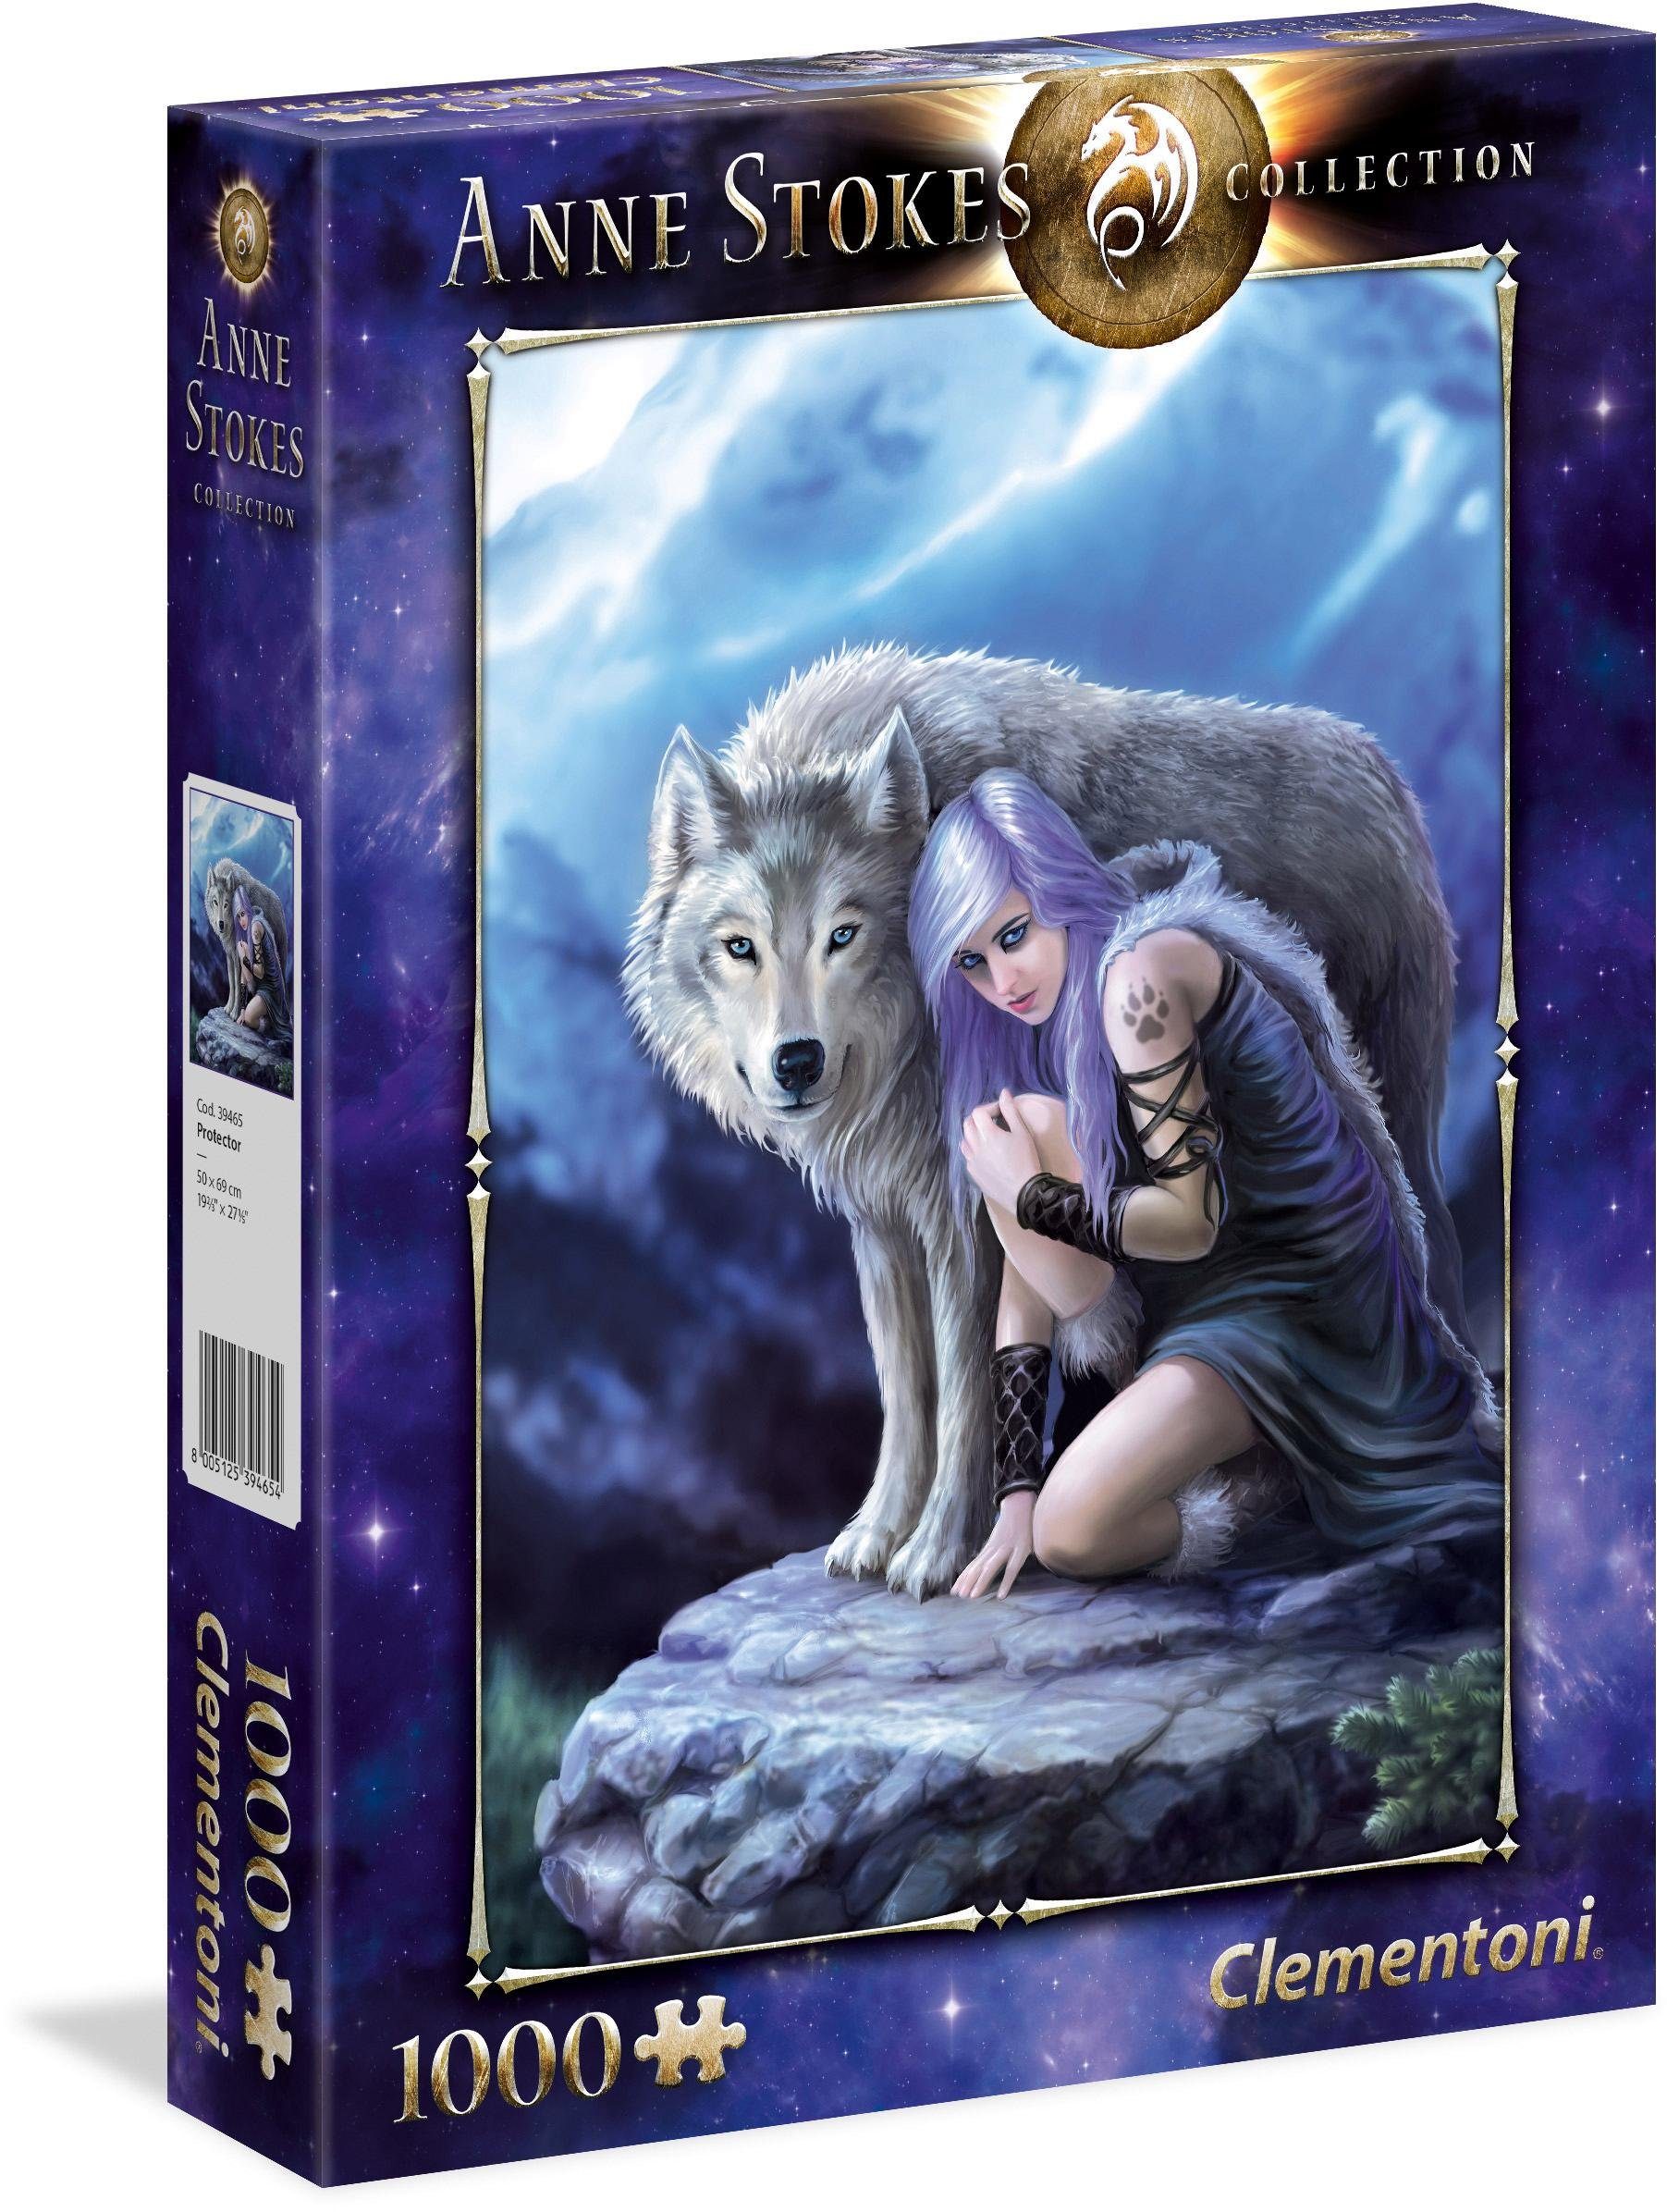 Clementoni® Puzzle Anne Stokes Collection, Beschützer, 1000 Puzzleteile, Made in Europe